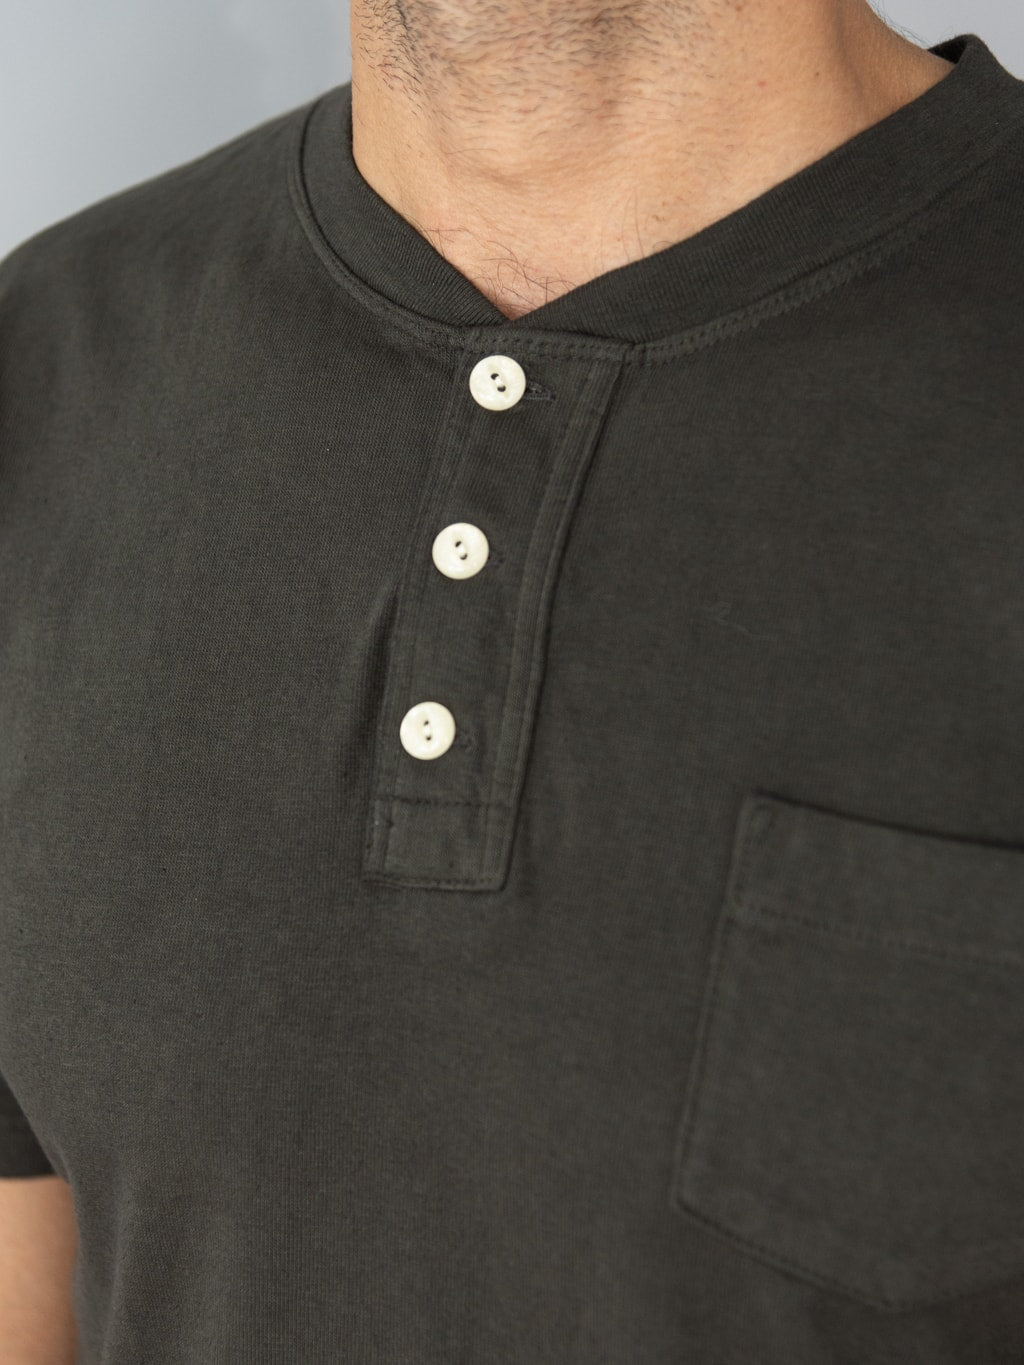 trophy clothing od henley tee black collar buttons